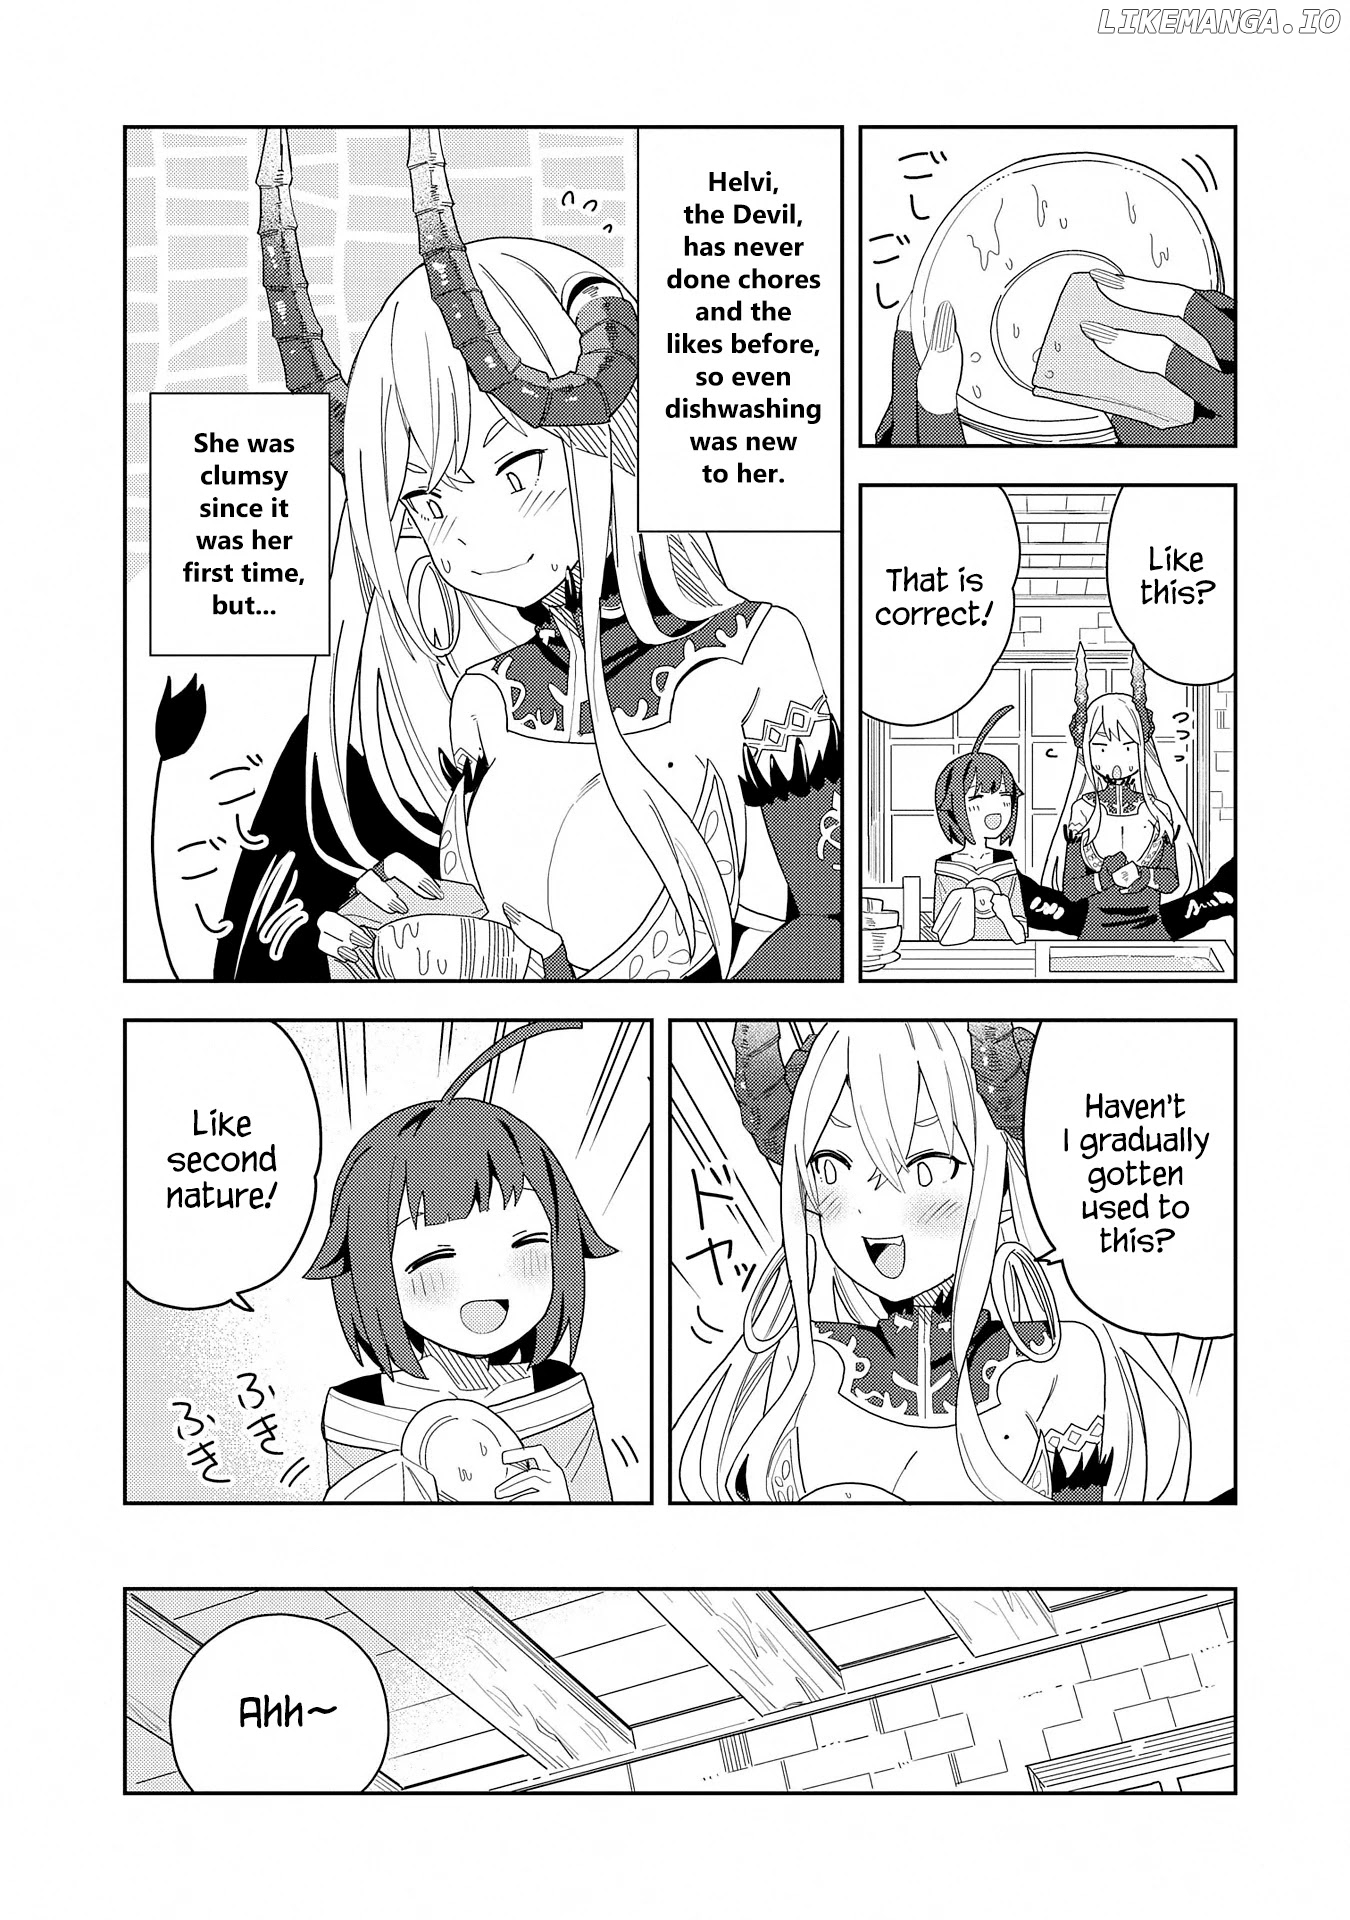 I Summoned The Devil To Grant Me a Wish, But I Married Her Instead Since She Was Adorable ~My New Devil Wife~ chapter 5 - page 19